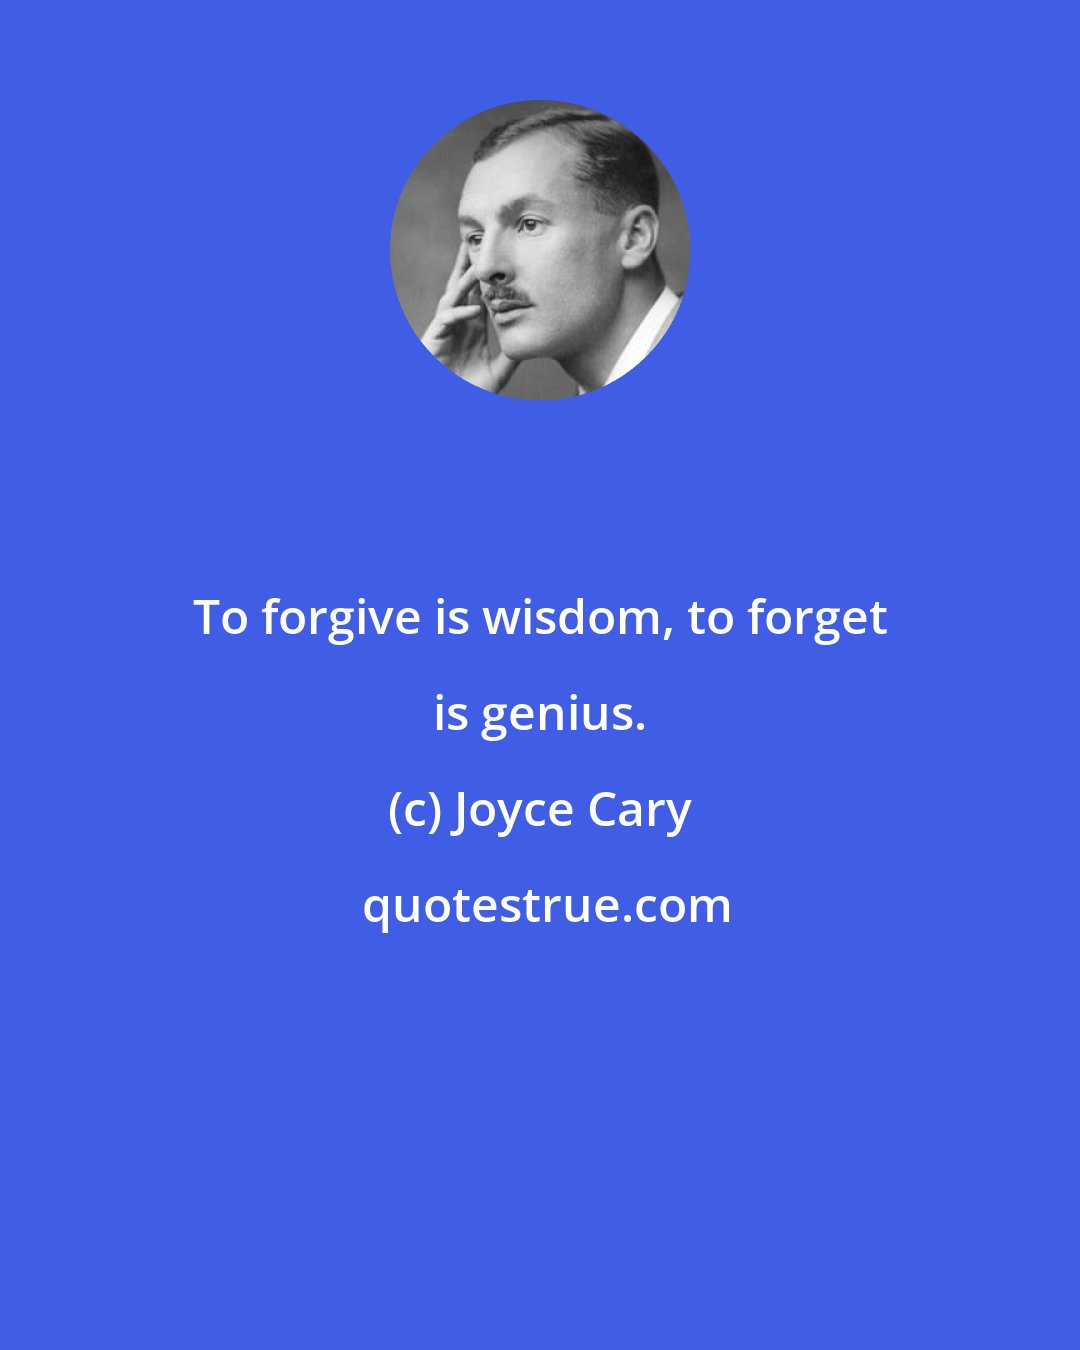 Joyce Cary: To forgive is wisdom, to forget is genius.